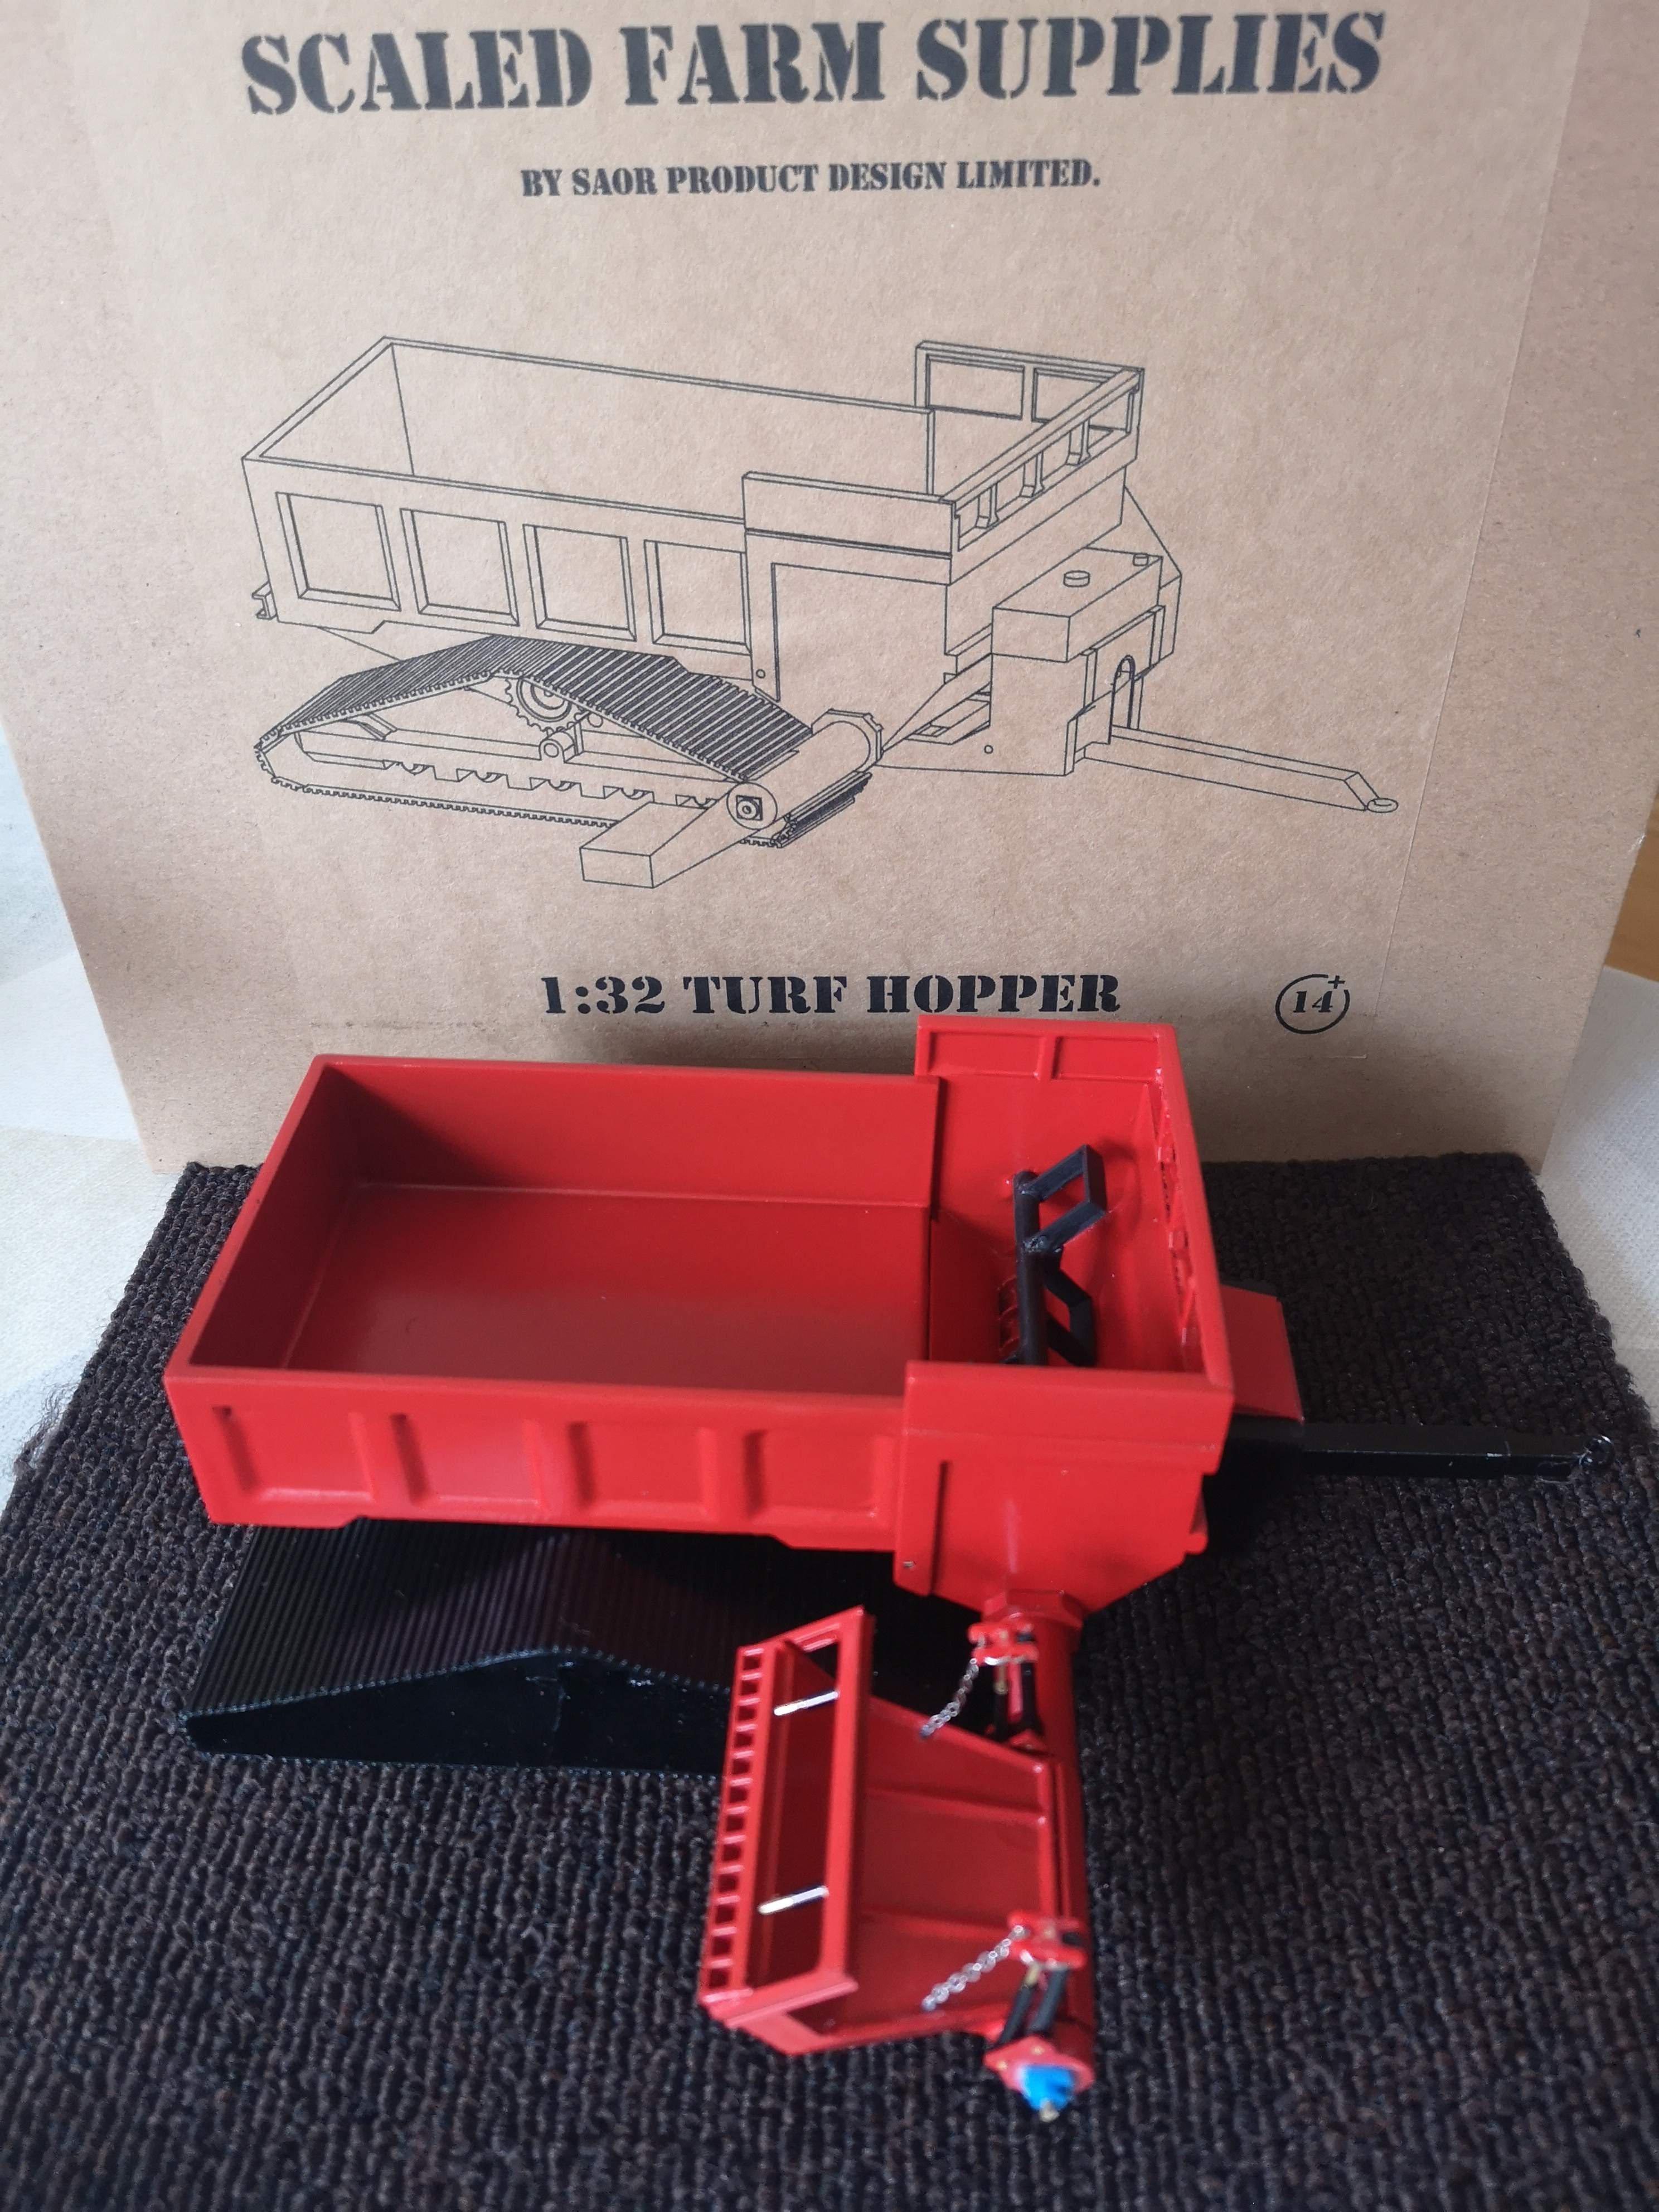 1:32 scale model of a Turf hopper that was 3d printed